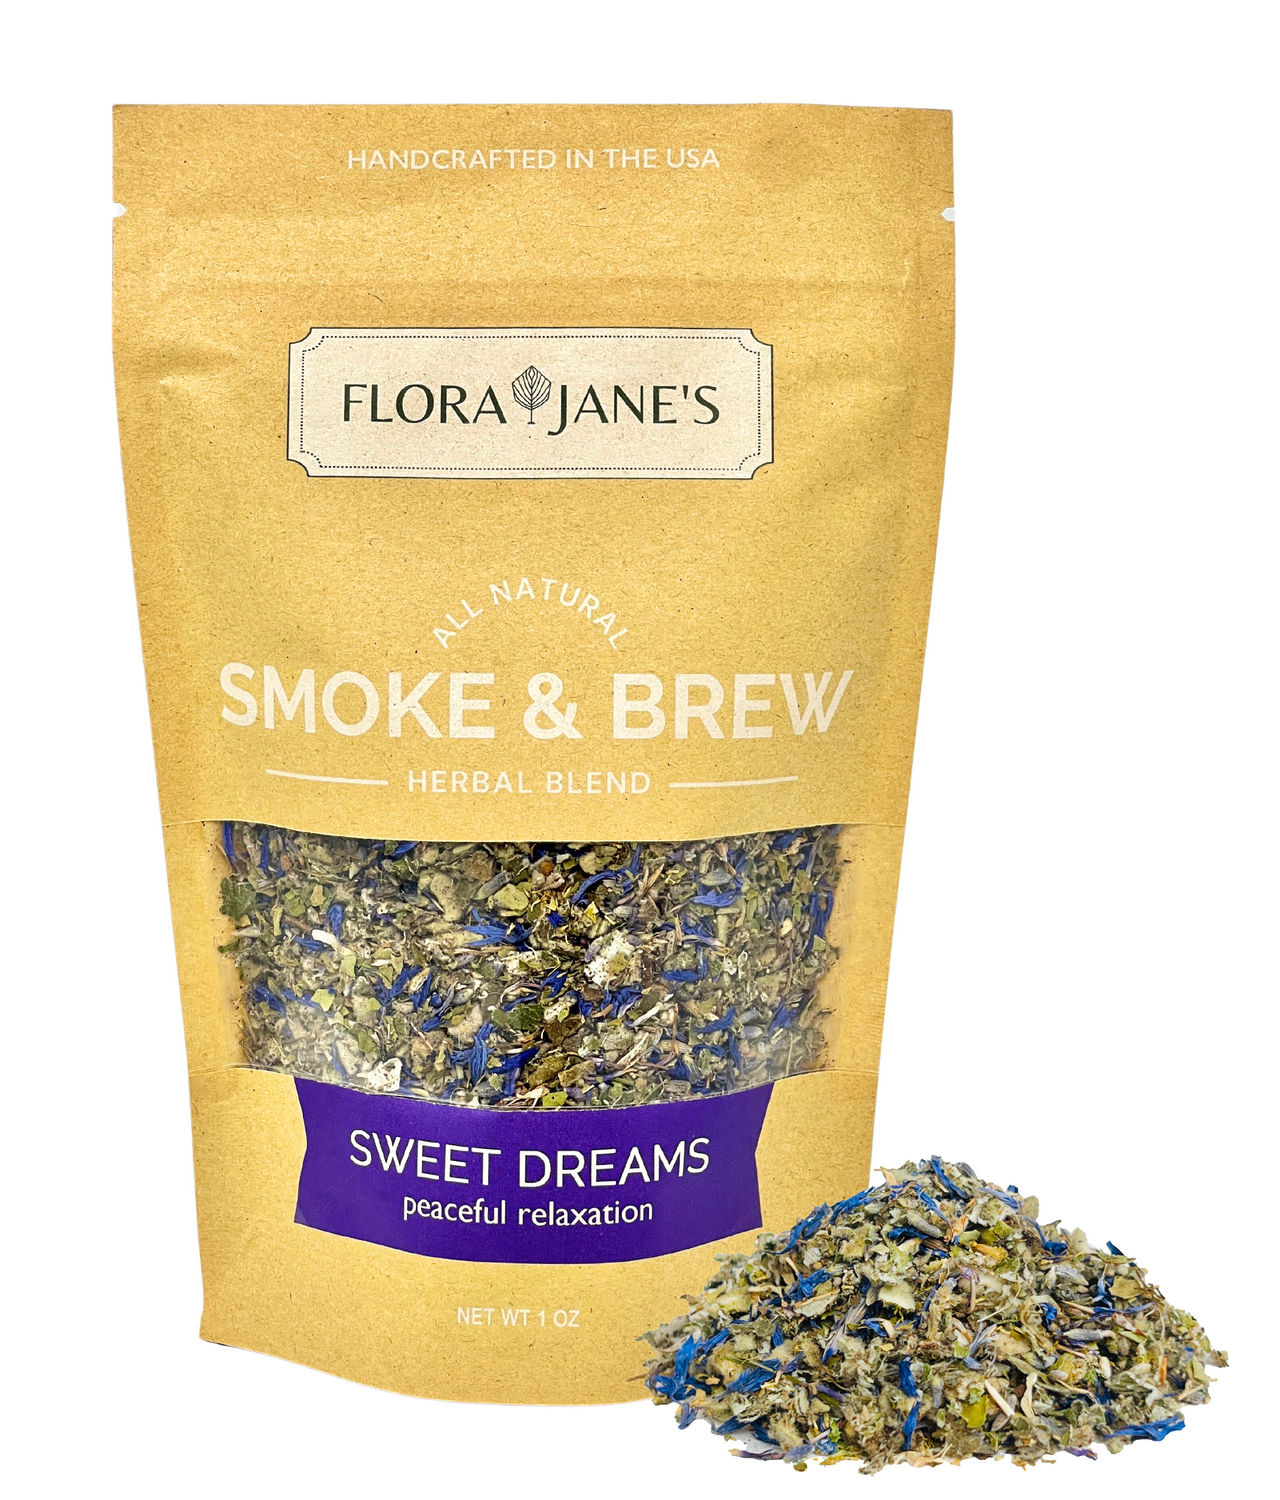 All natural herbal blend for tobacco alternative. Can be used as herbal tea, or smoked.